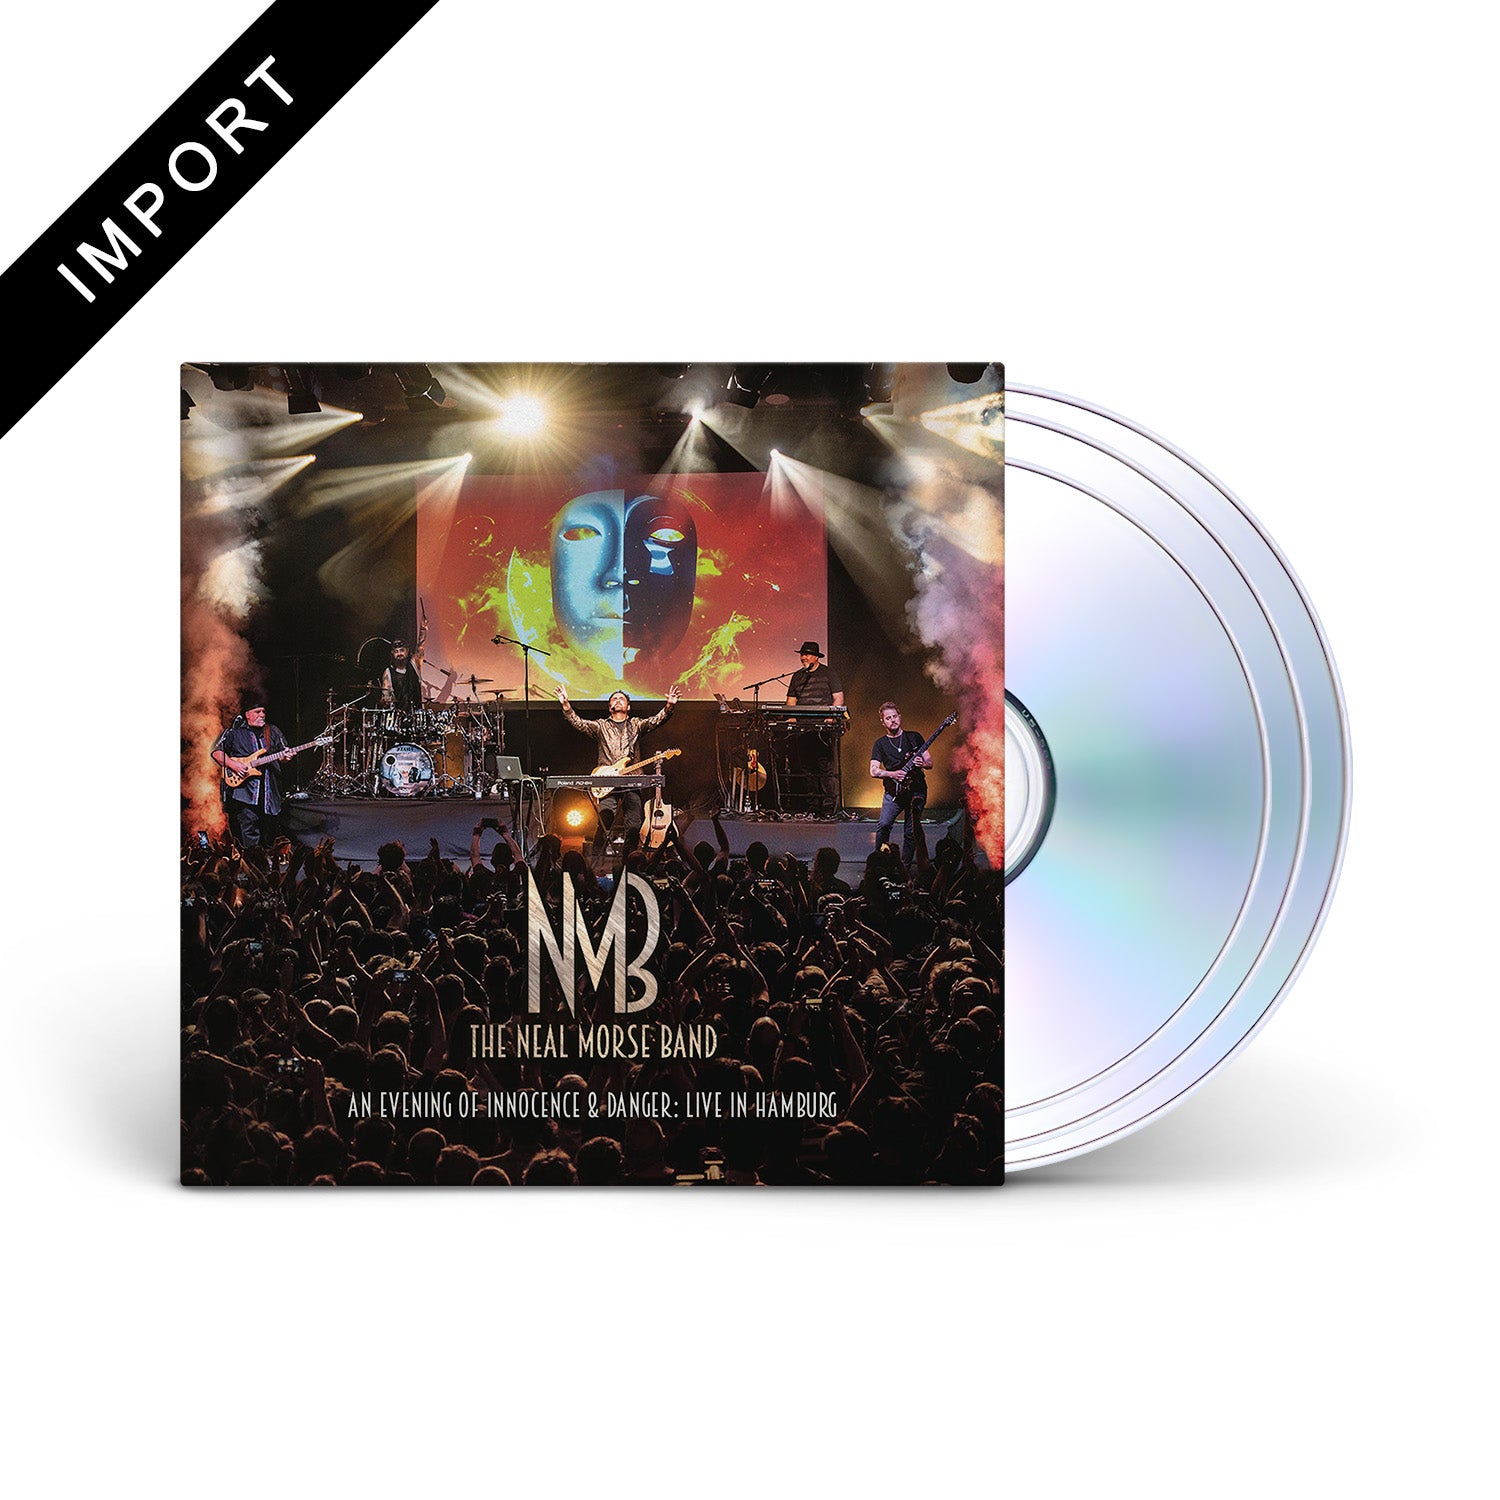 THE NEAL MORSE BAND - An Evening of Innocence & Danger: Live In Hamburg - 3xCD